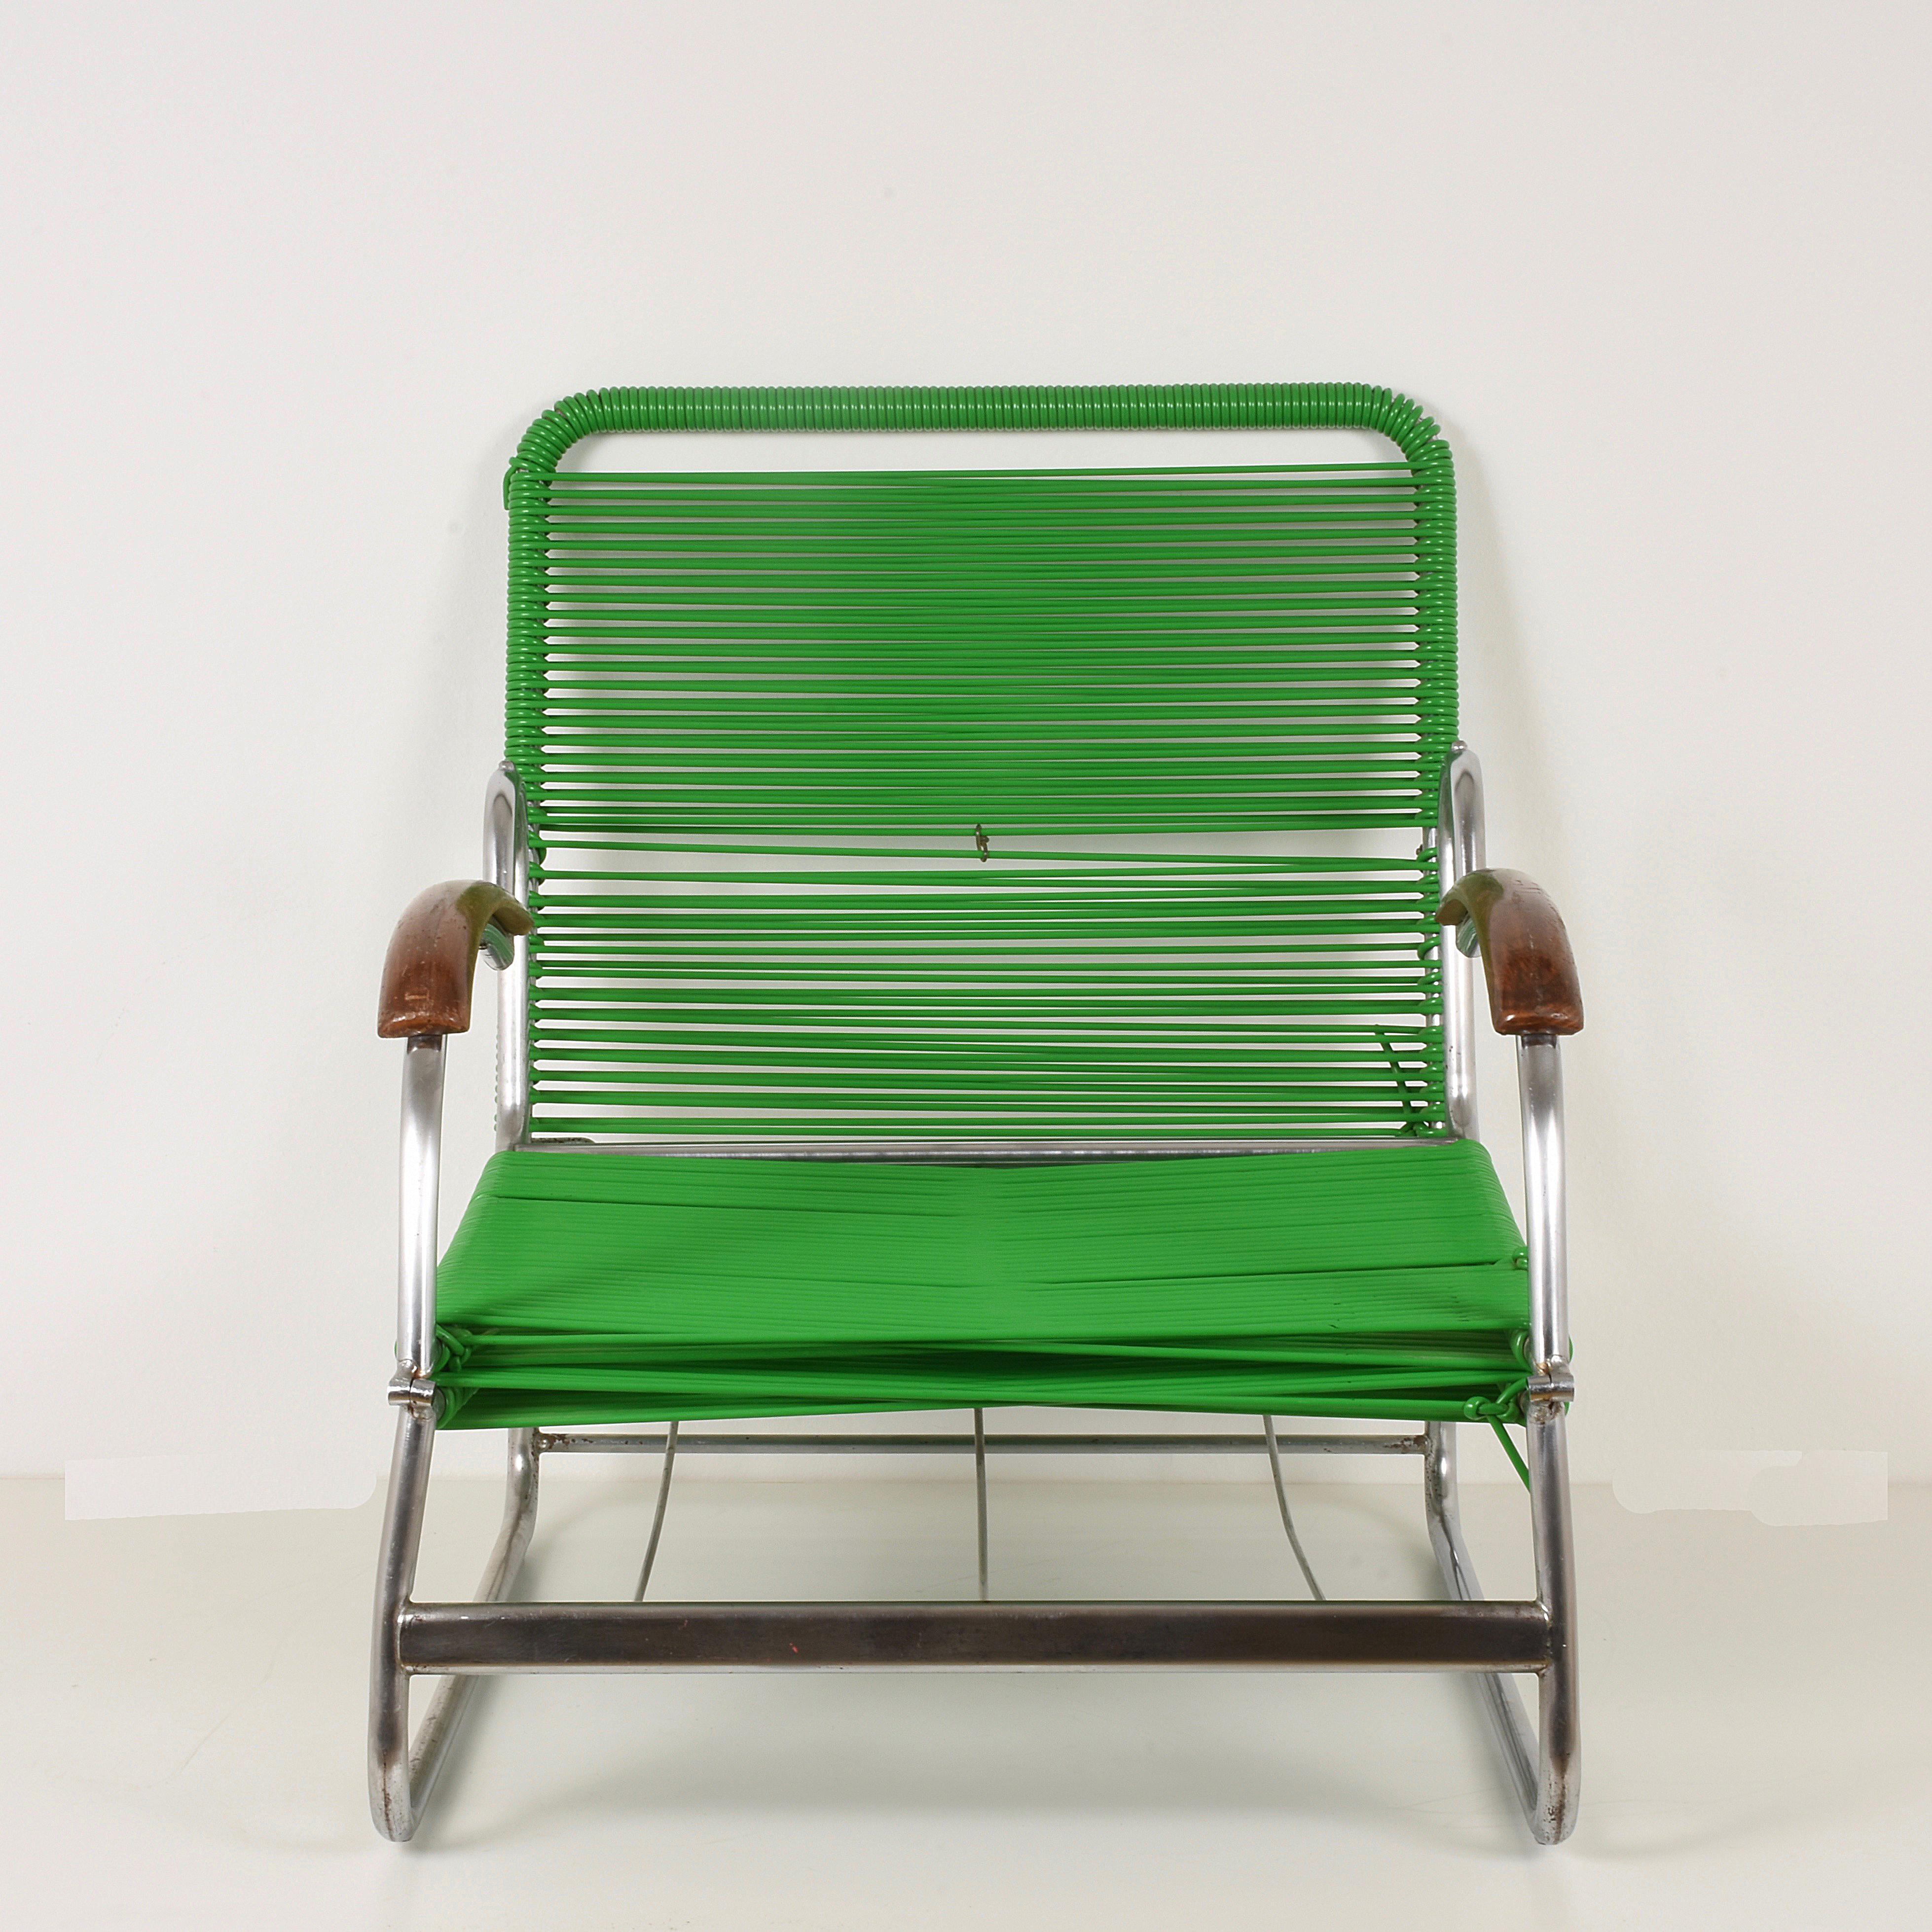 Mid-20th Century Art Deco Chrome Metal and PVC Green Cord Armchair in Marcel Breuer Style, 1930s